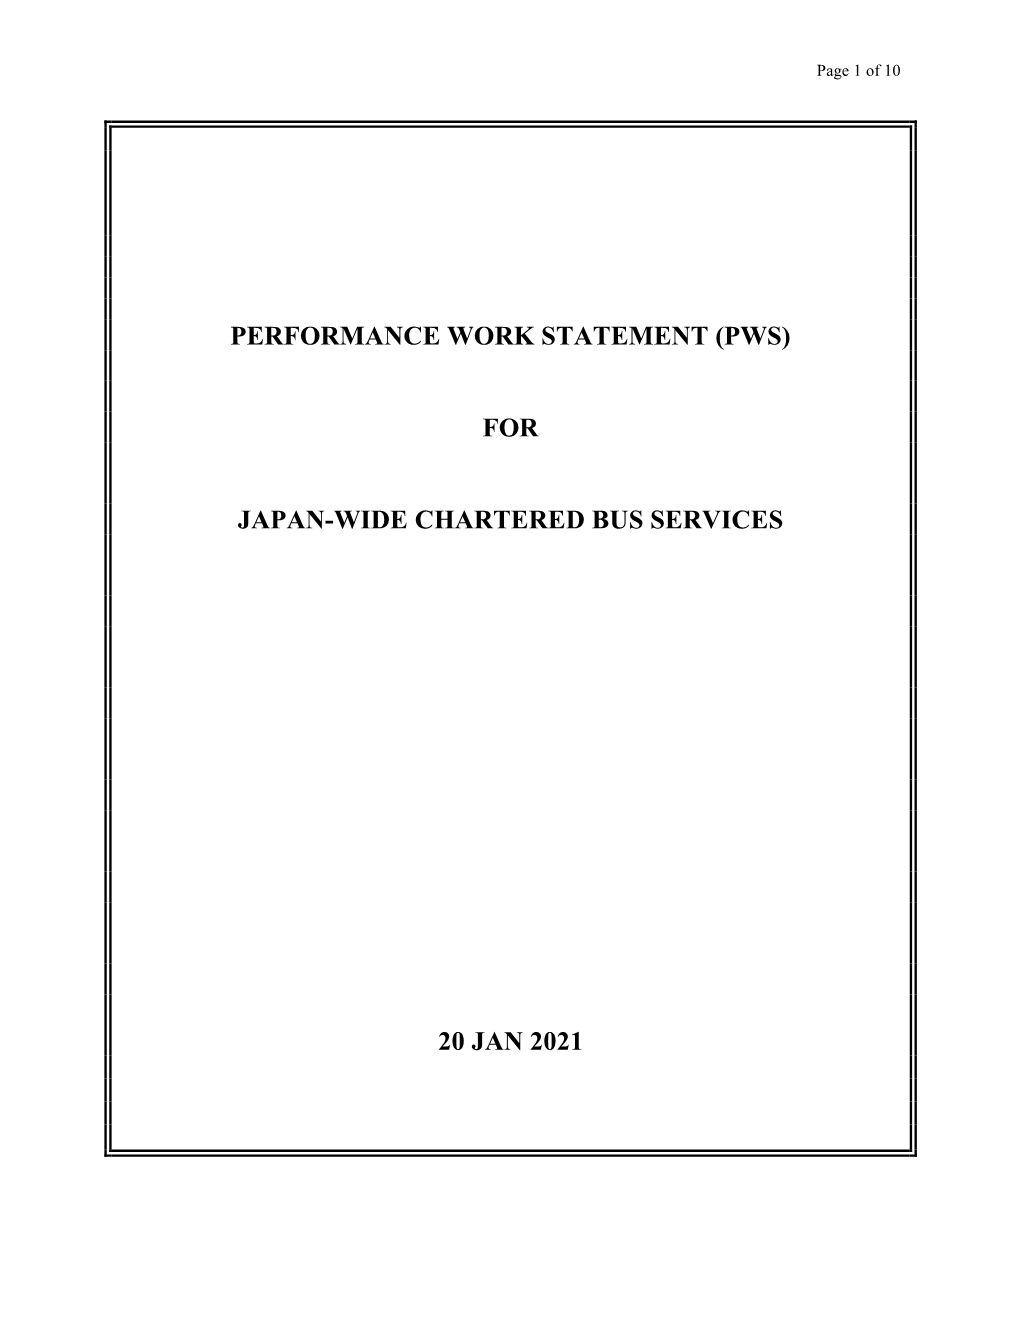 (Pws) for Japan-Wide Chartered Bus